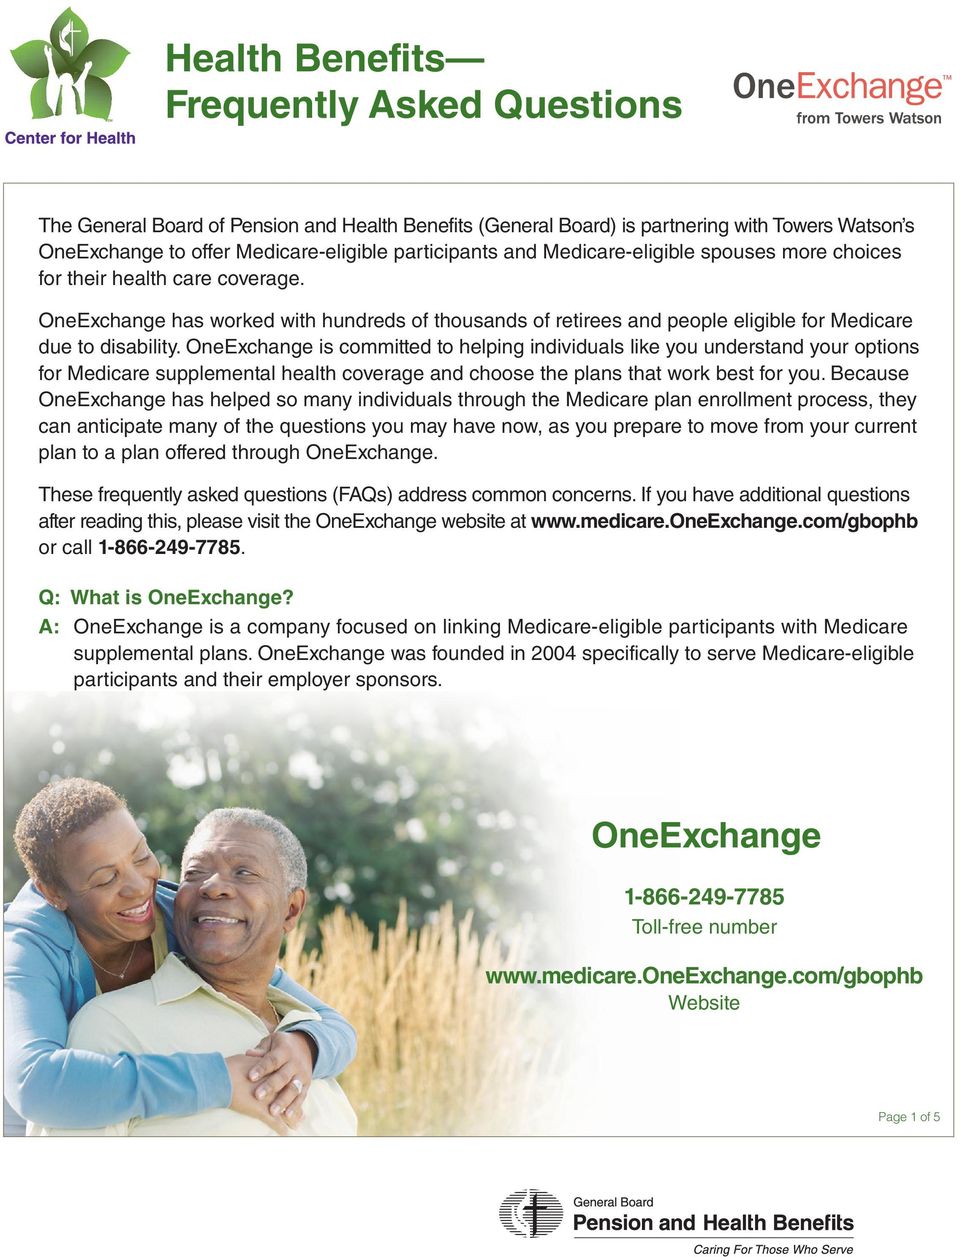 OneExchange is committed to helping individuals like you understand your options for Medicare supplemental health coverage and choose the plans that work best for you.